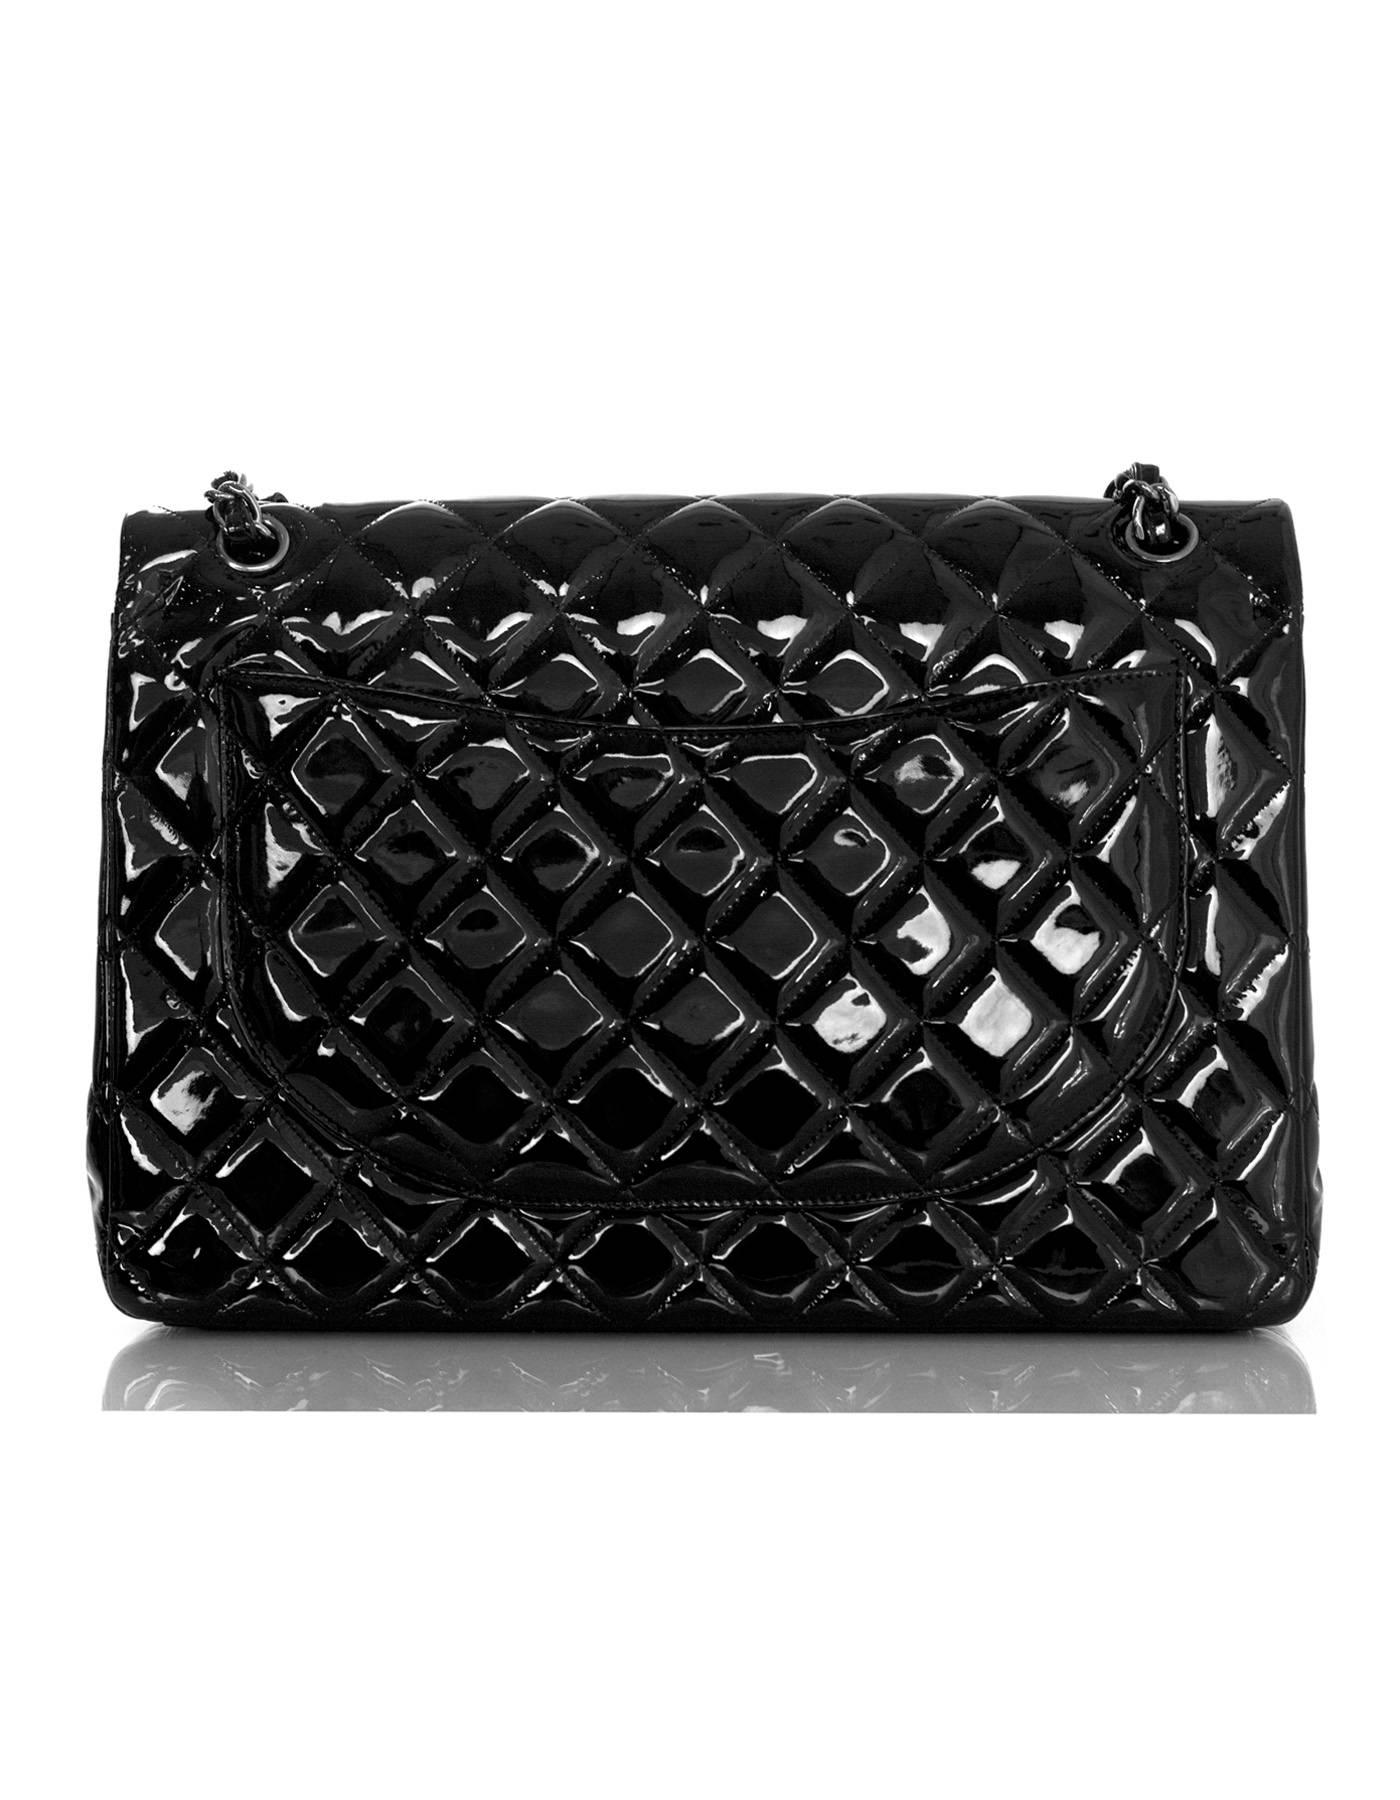 Women's Chanel Black Quilted Patent Leather Double Flap Classic Maxi Bag